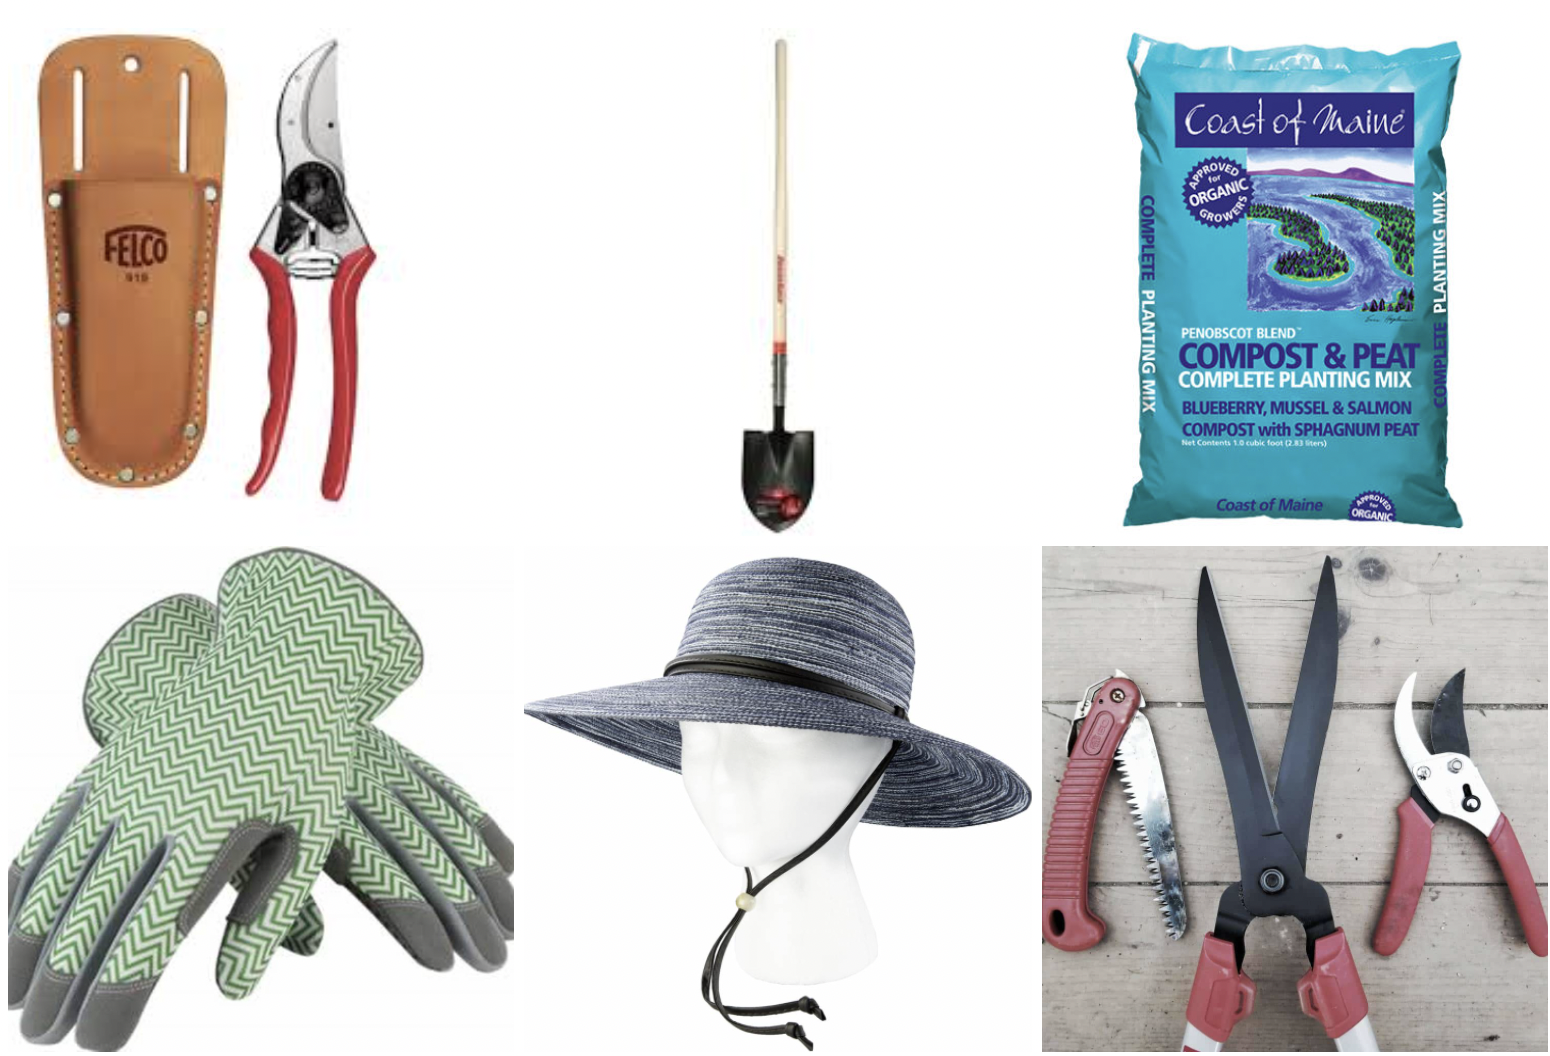 Nine Essential Tools for the new Gardening